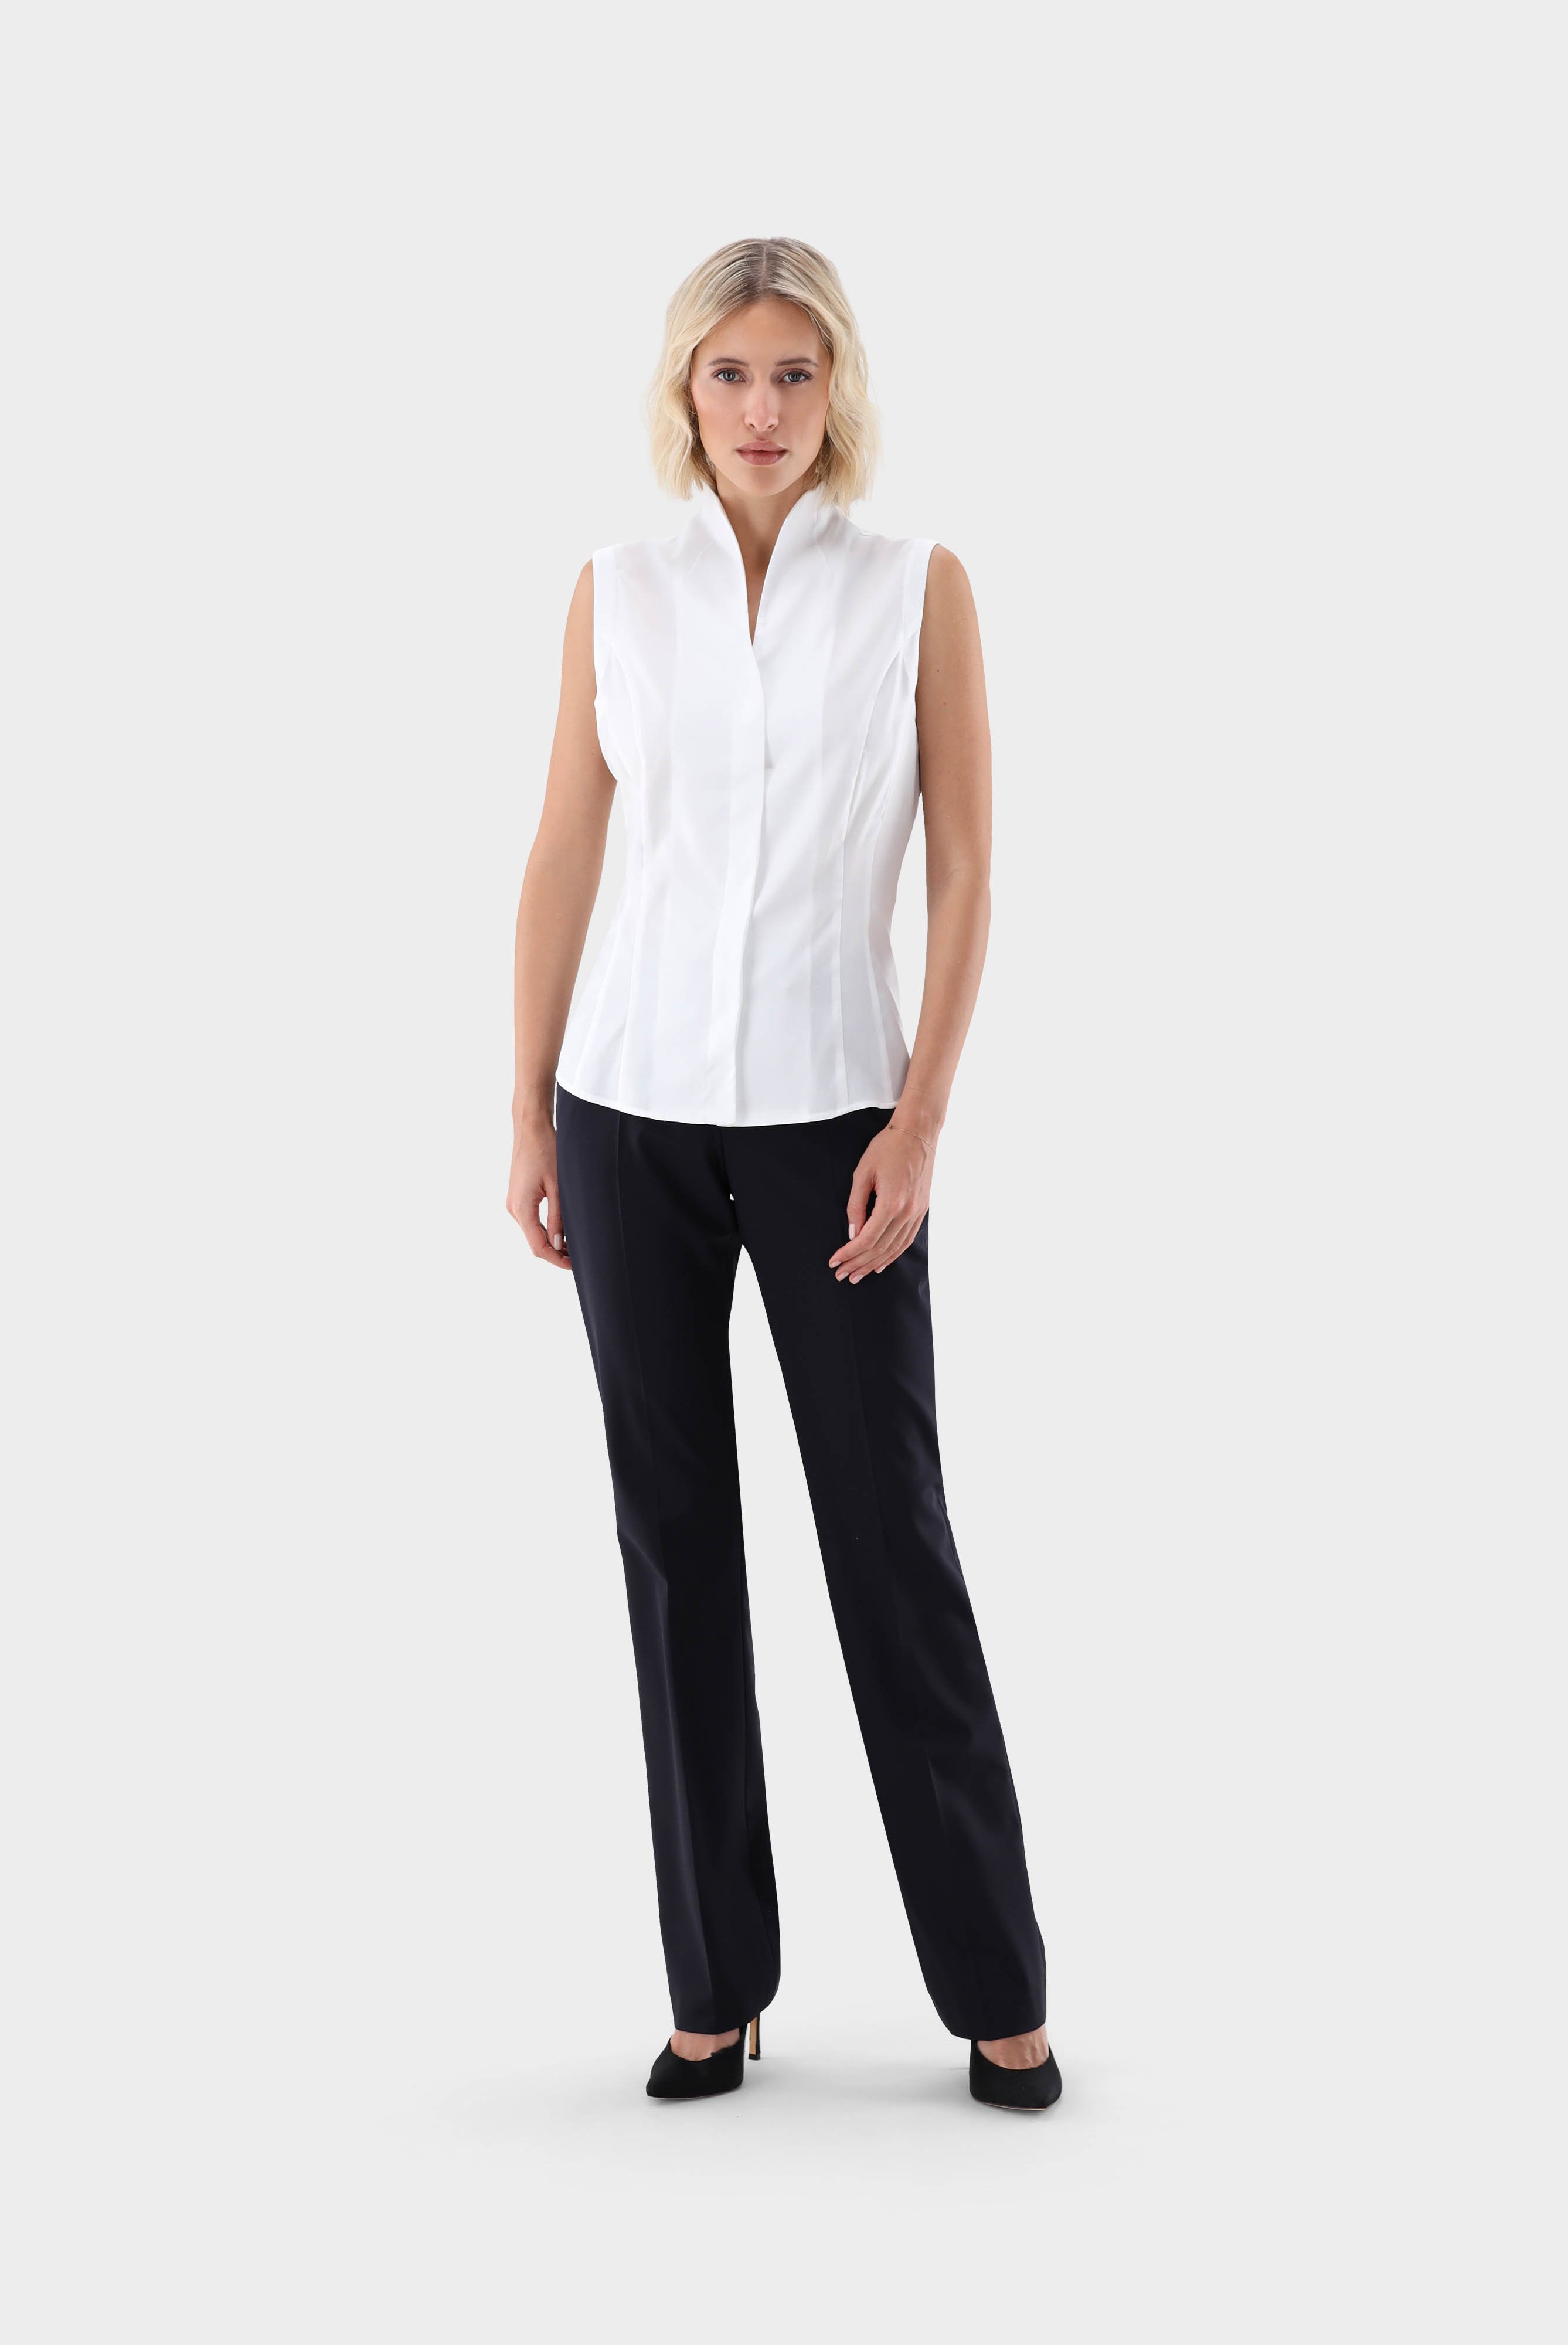 Business Blouses+Sleeveless Chalice Collar Blouse+05.5857.73.130532.000.32